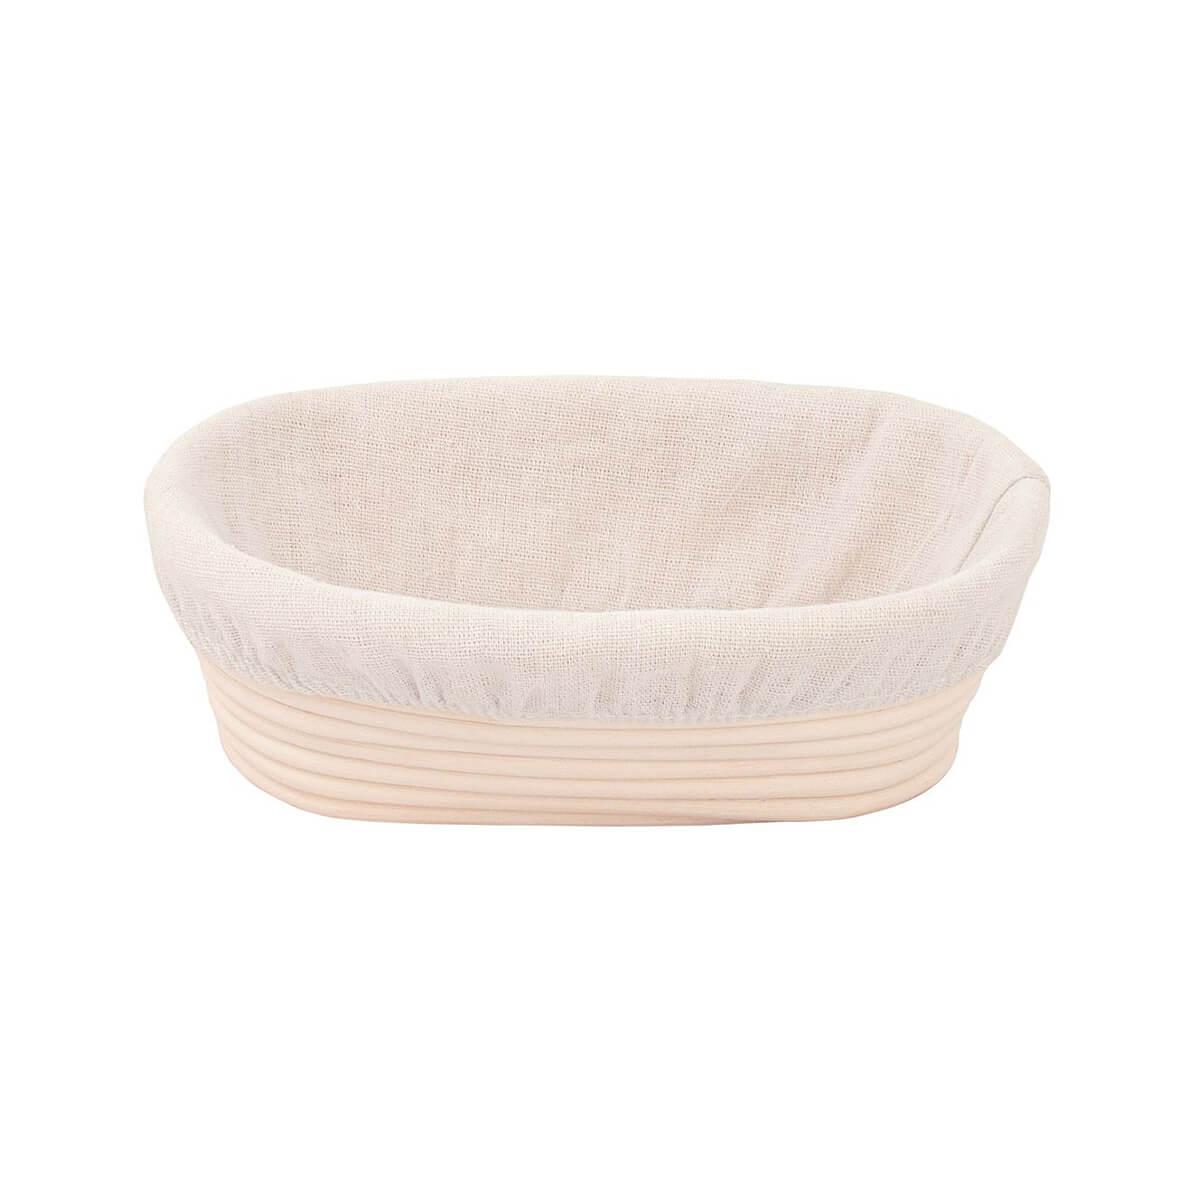  Oval Bread- Proofing Basket With Liner